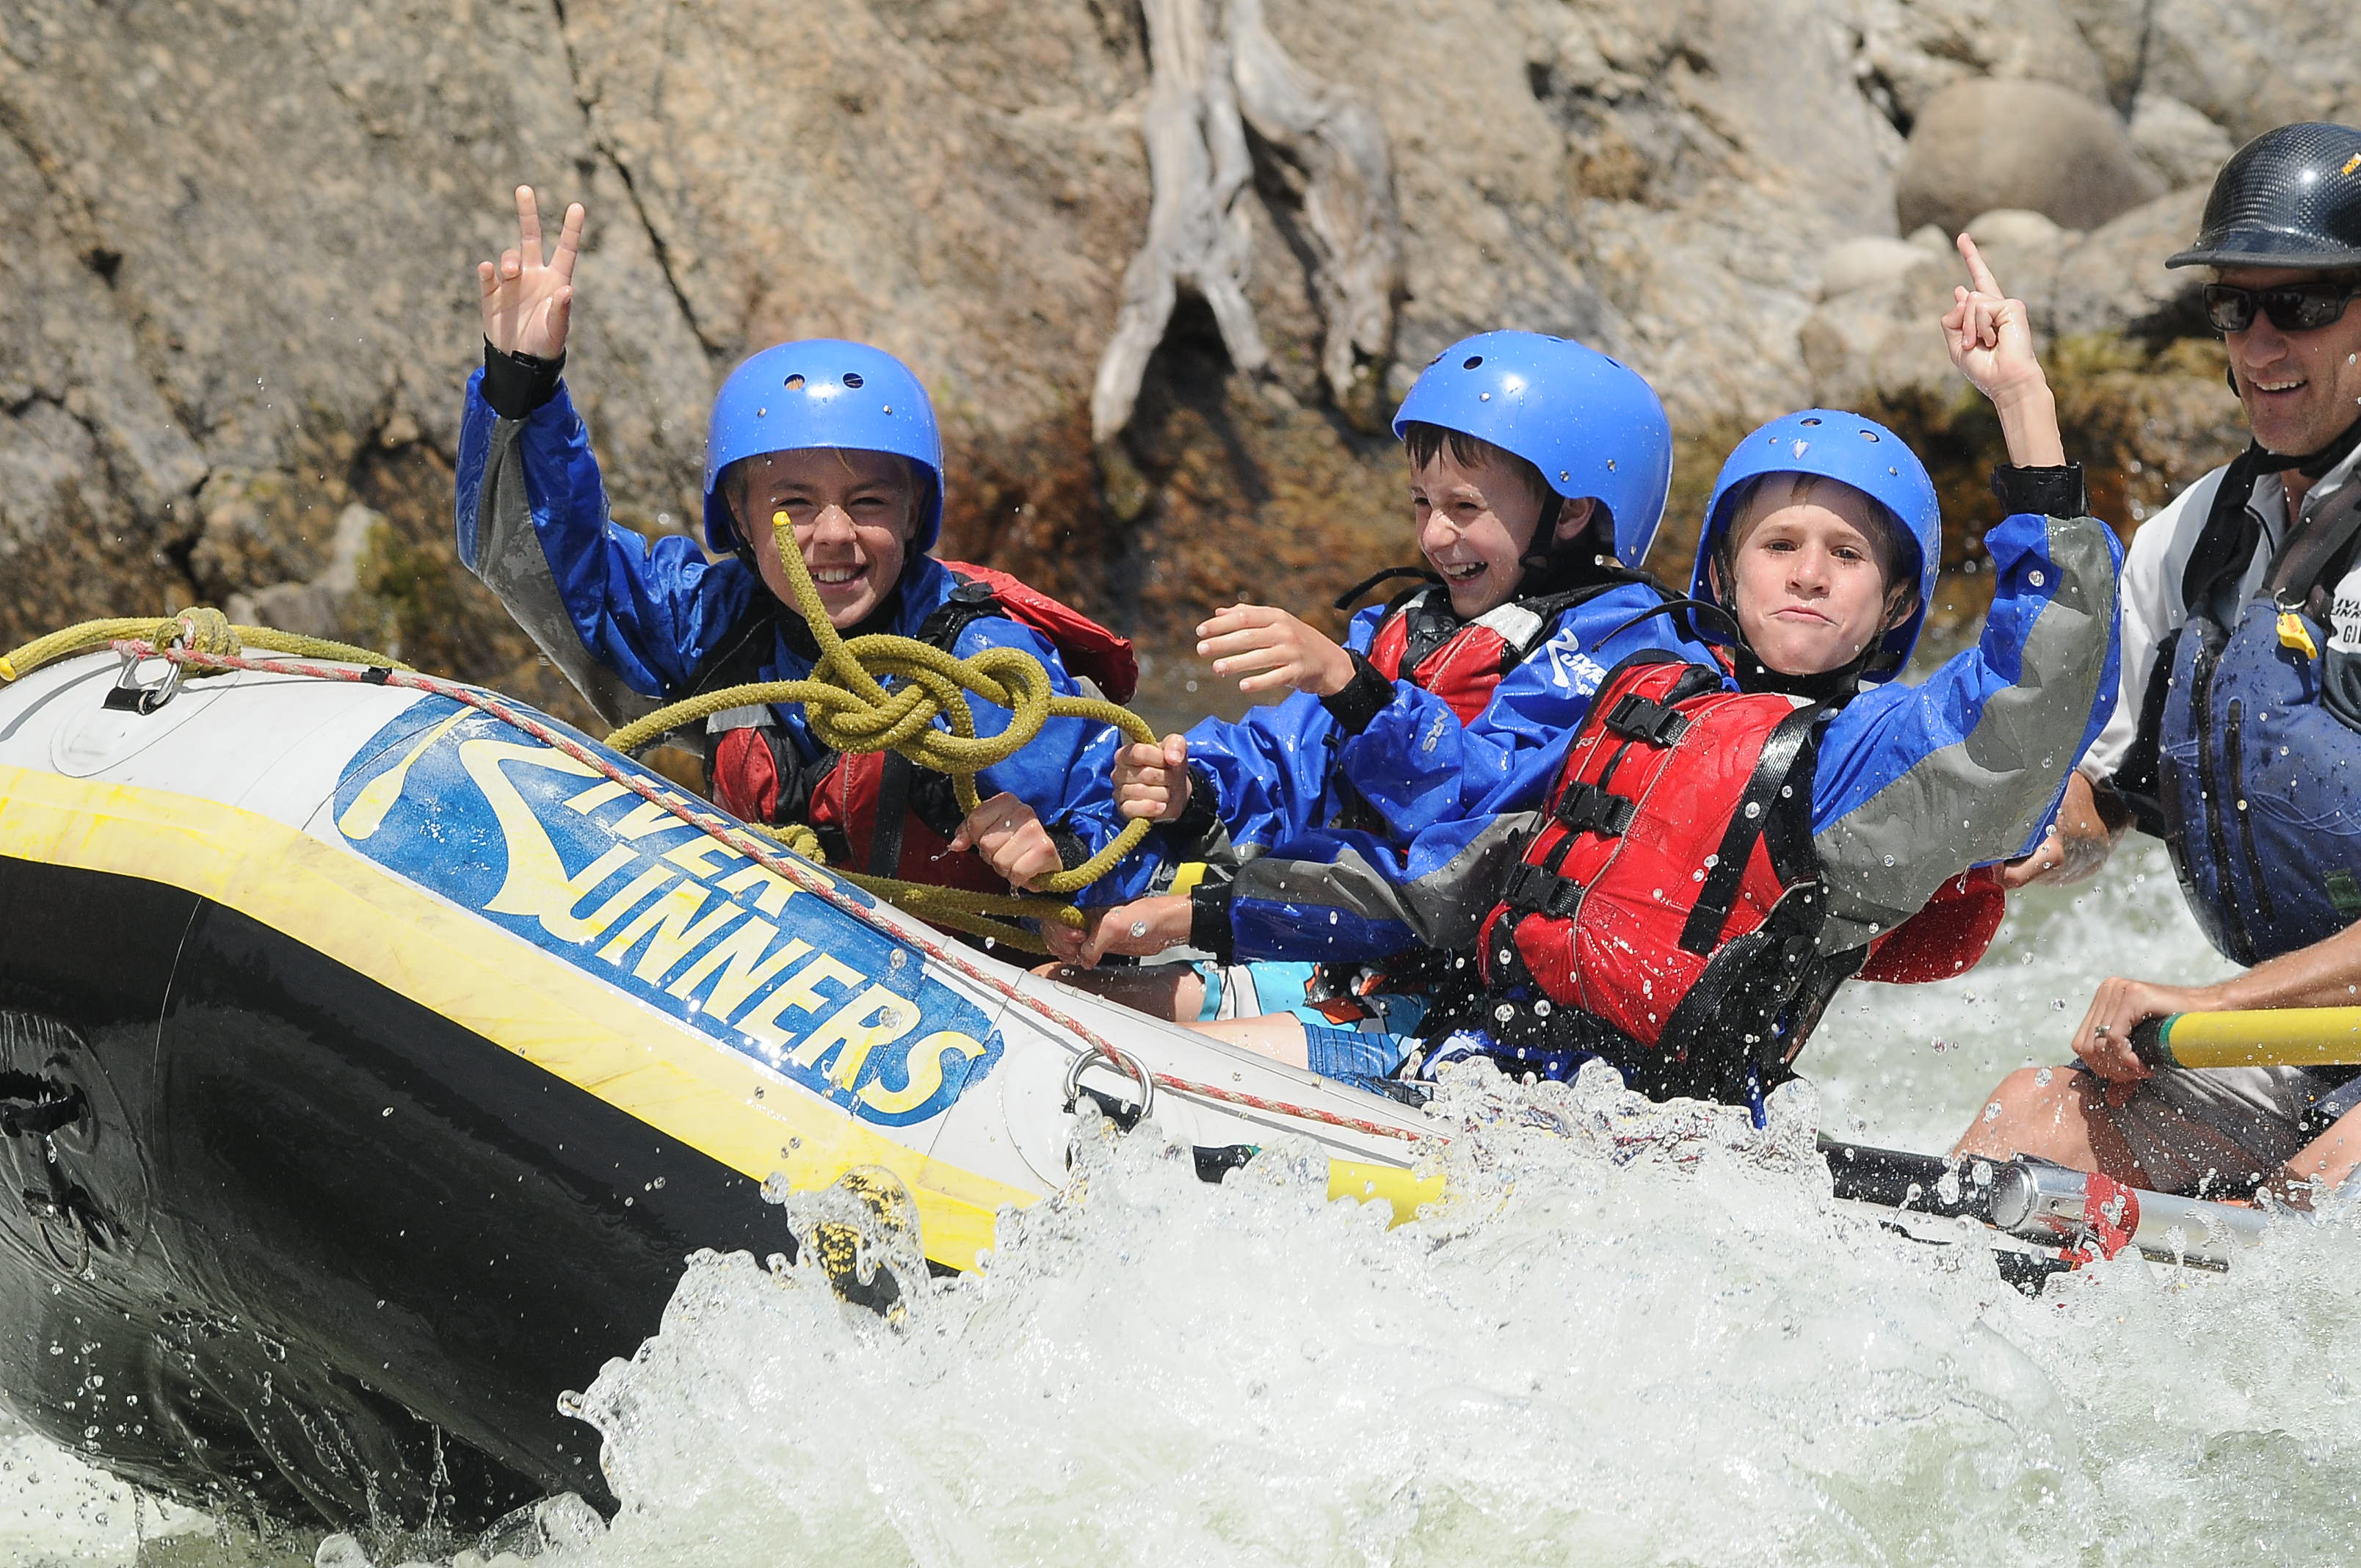 Raft with River Runners through Labor Day.